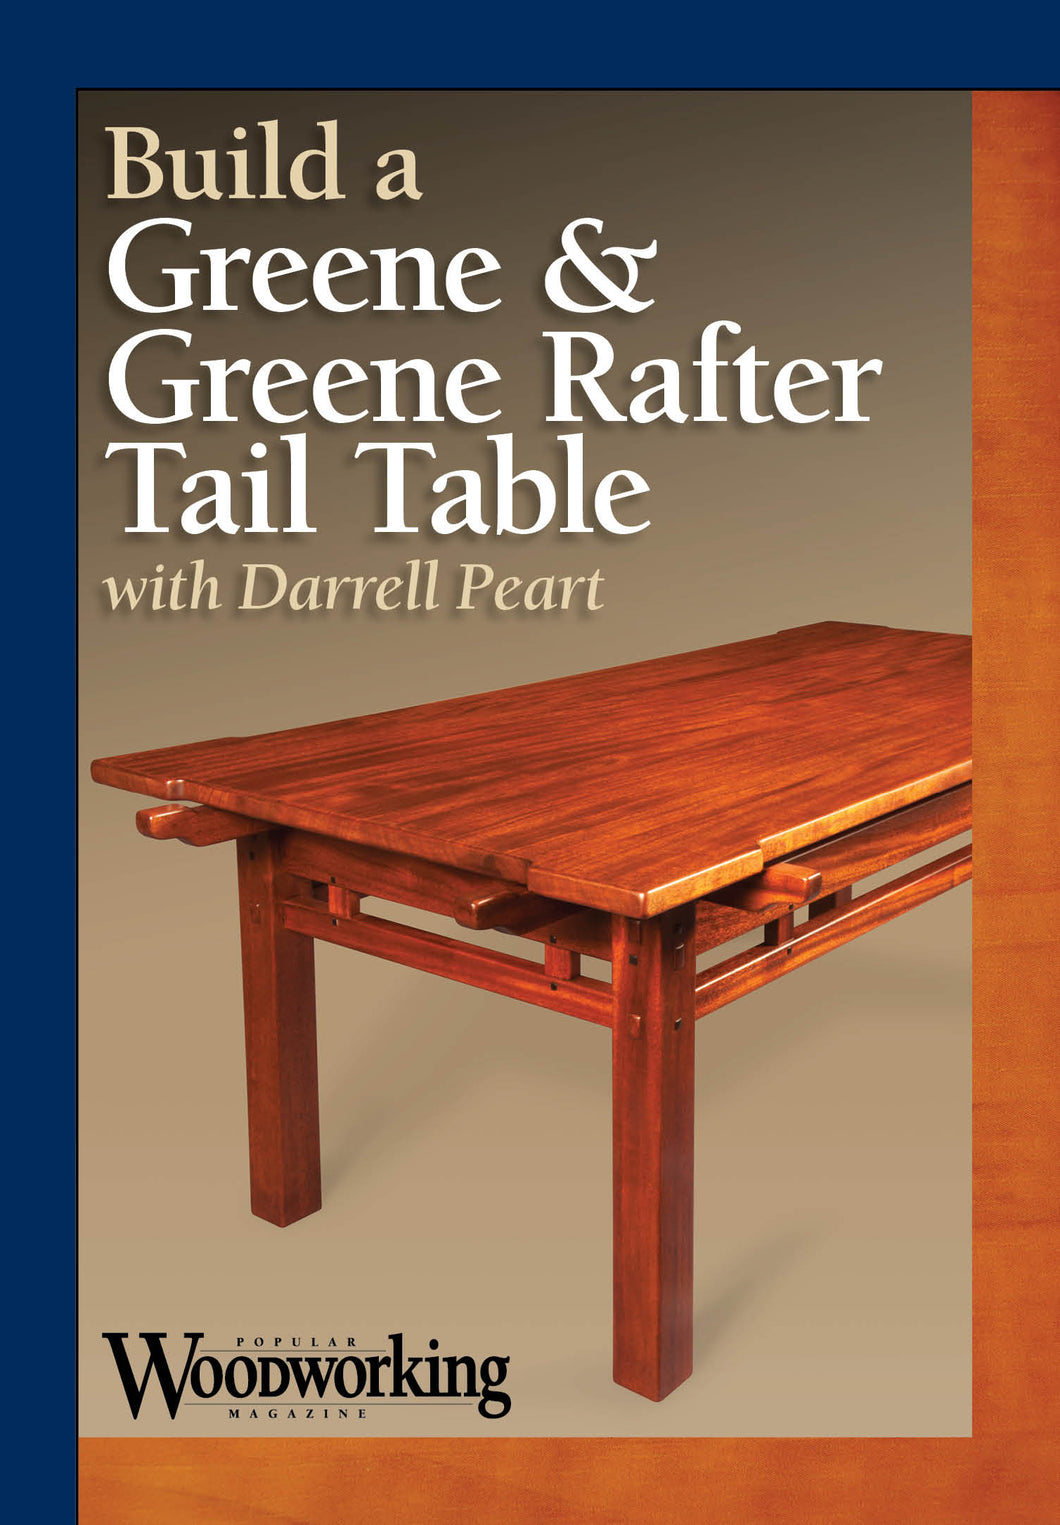 Build a Greene & Greene Rafter Tail Table  Video Download